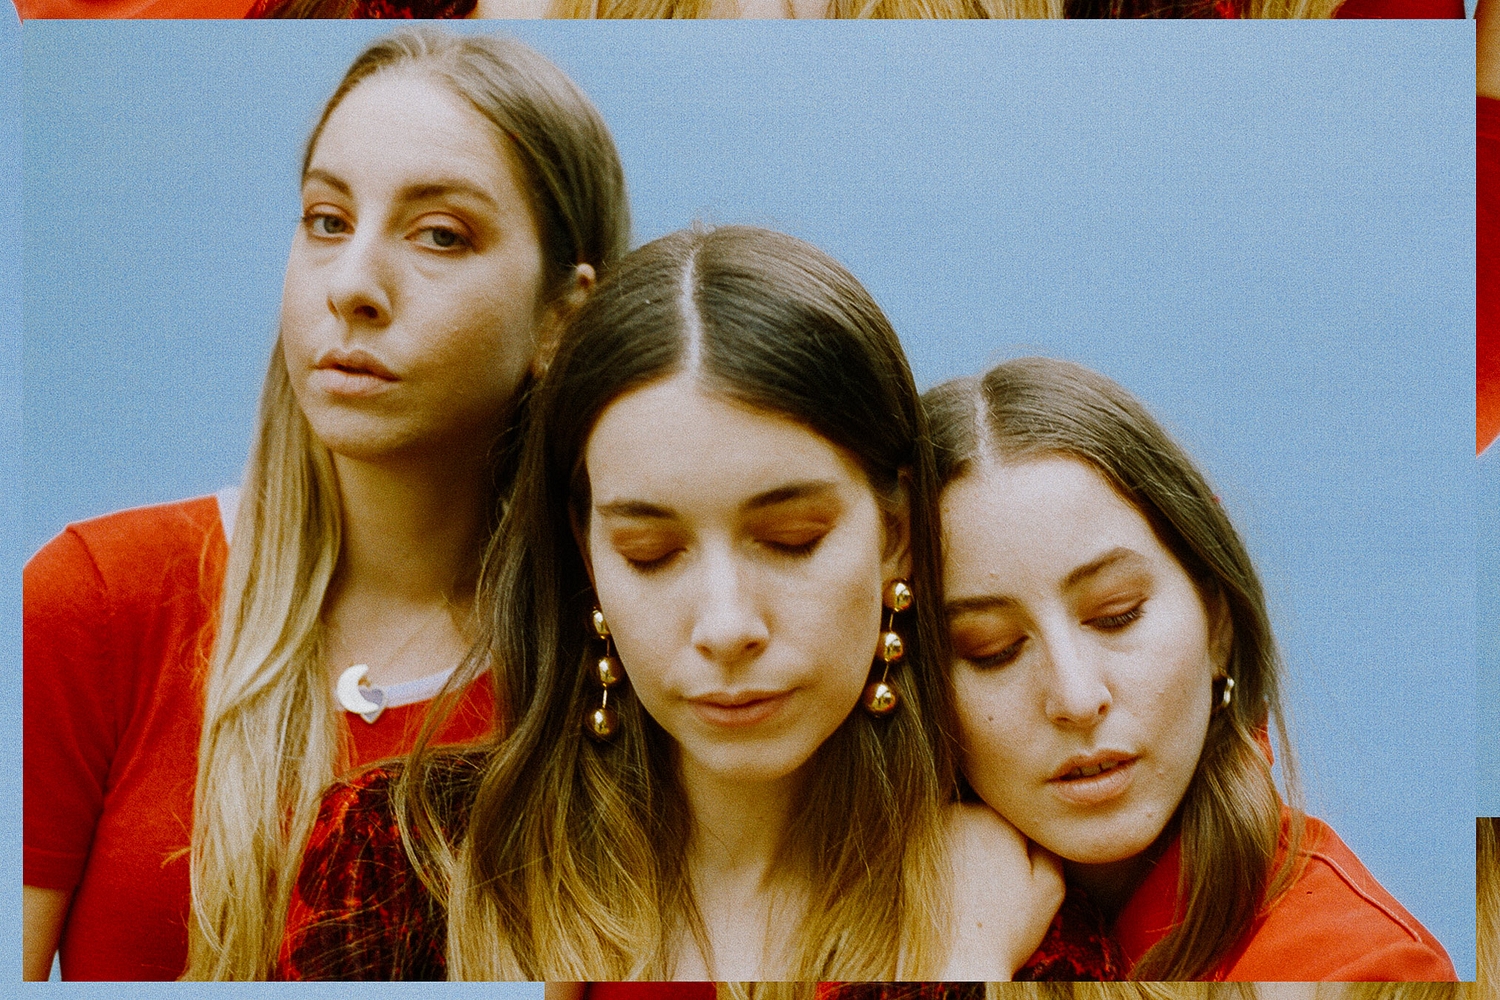 Haim’s Coachella set will feature visuals from Paul Thomas Anderson